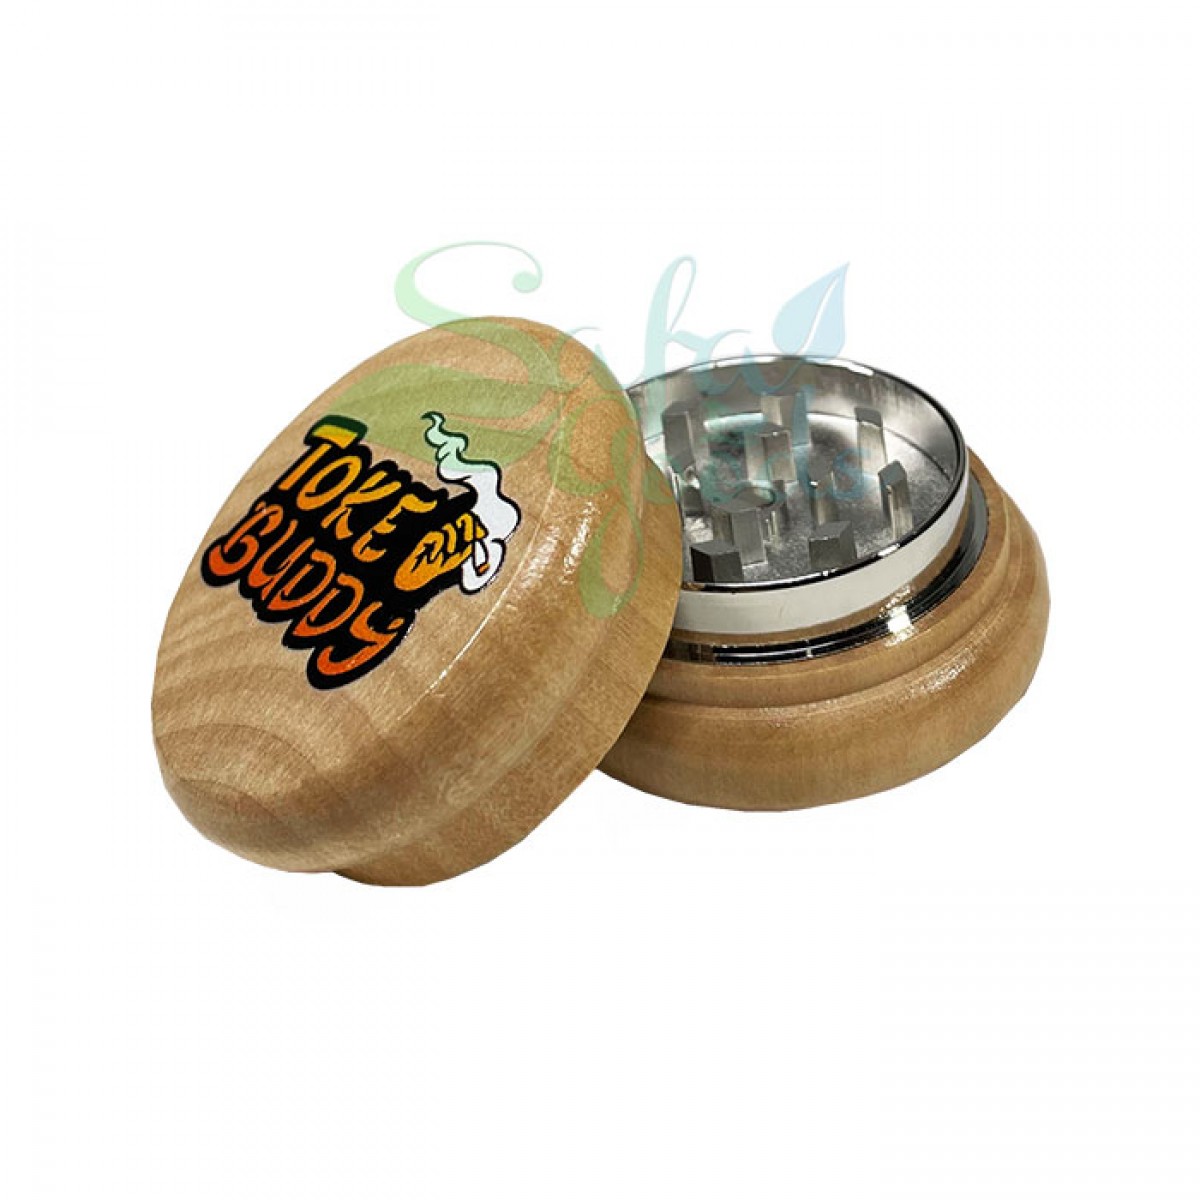 Toke Buddy Wooden Grinders 55mm 2 Stage 12pc